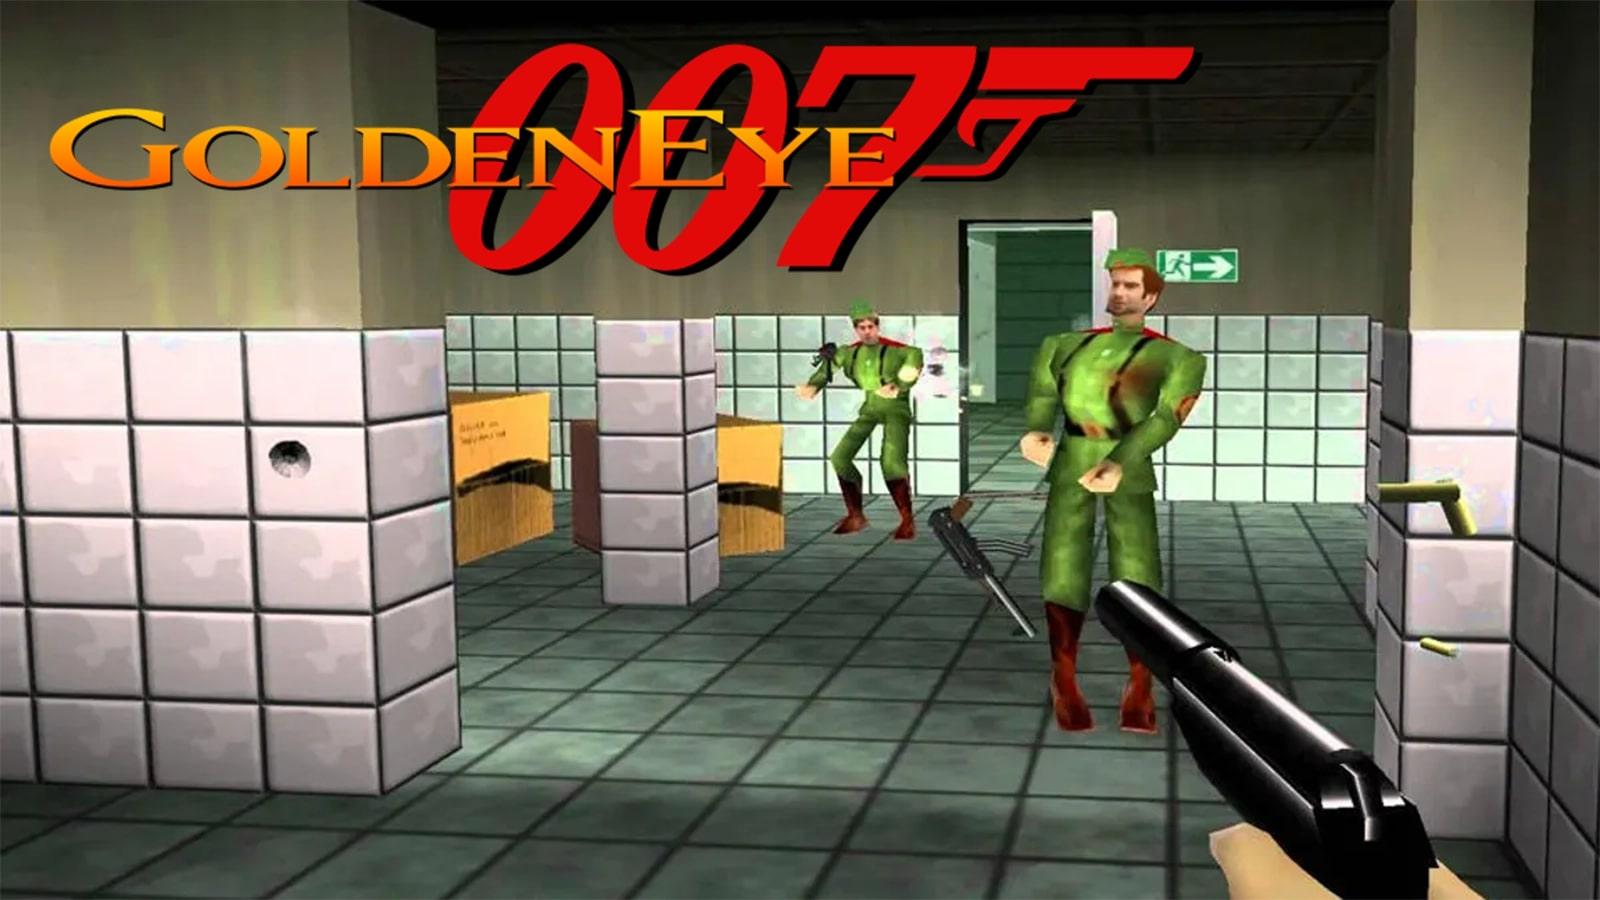 GoldenEye 007 is still Bond at its best 25 years later